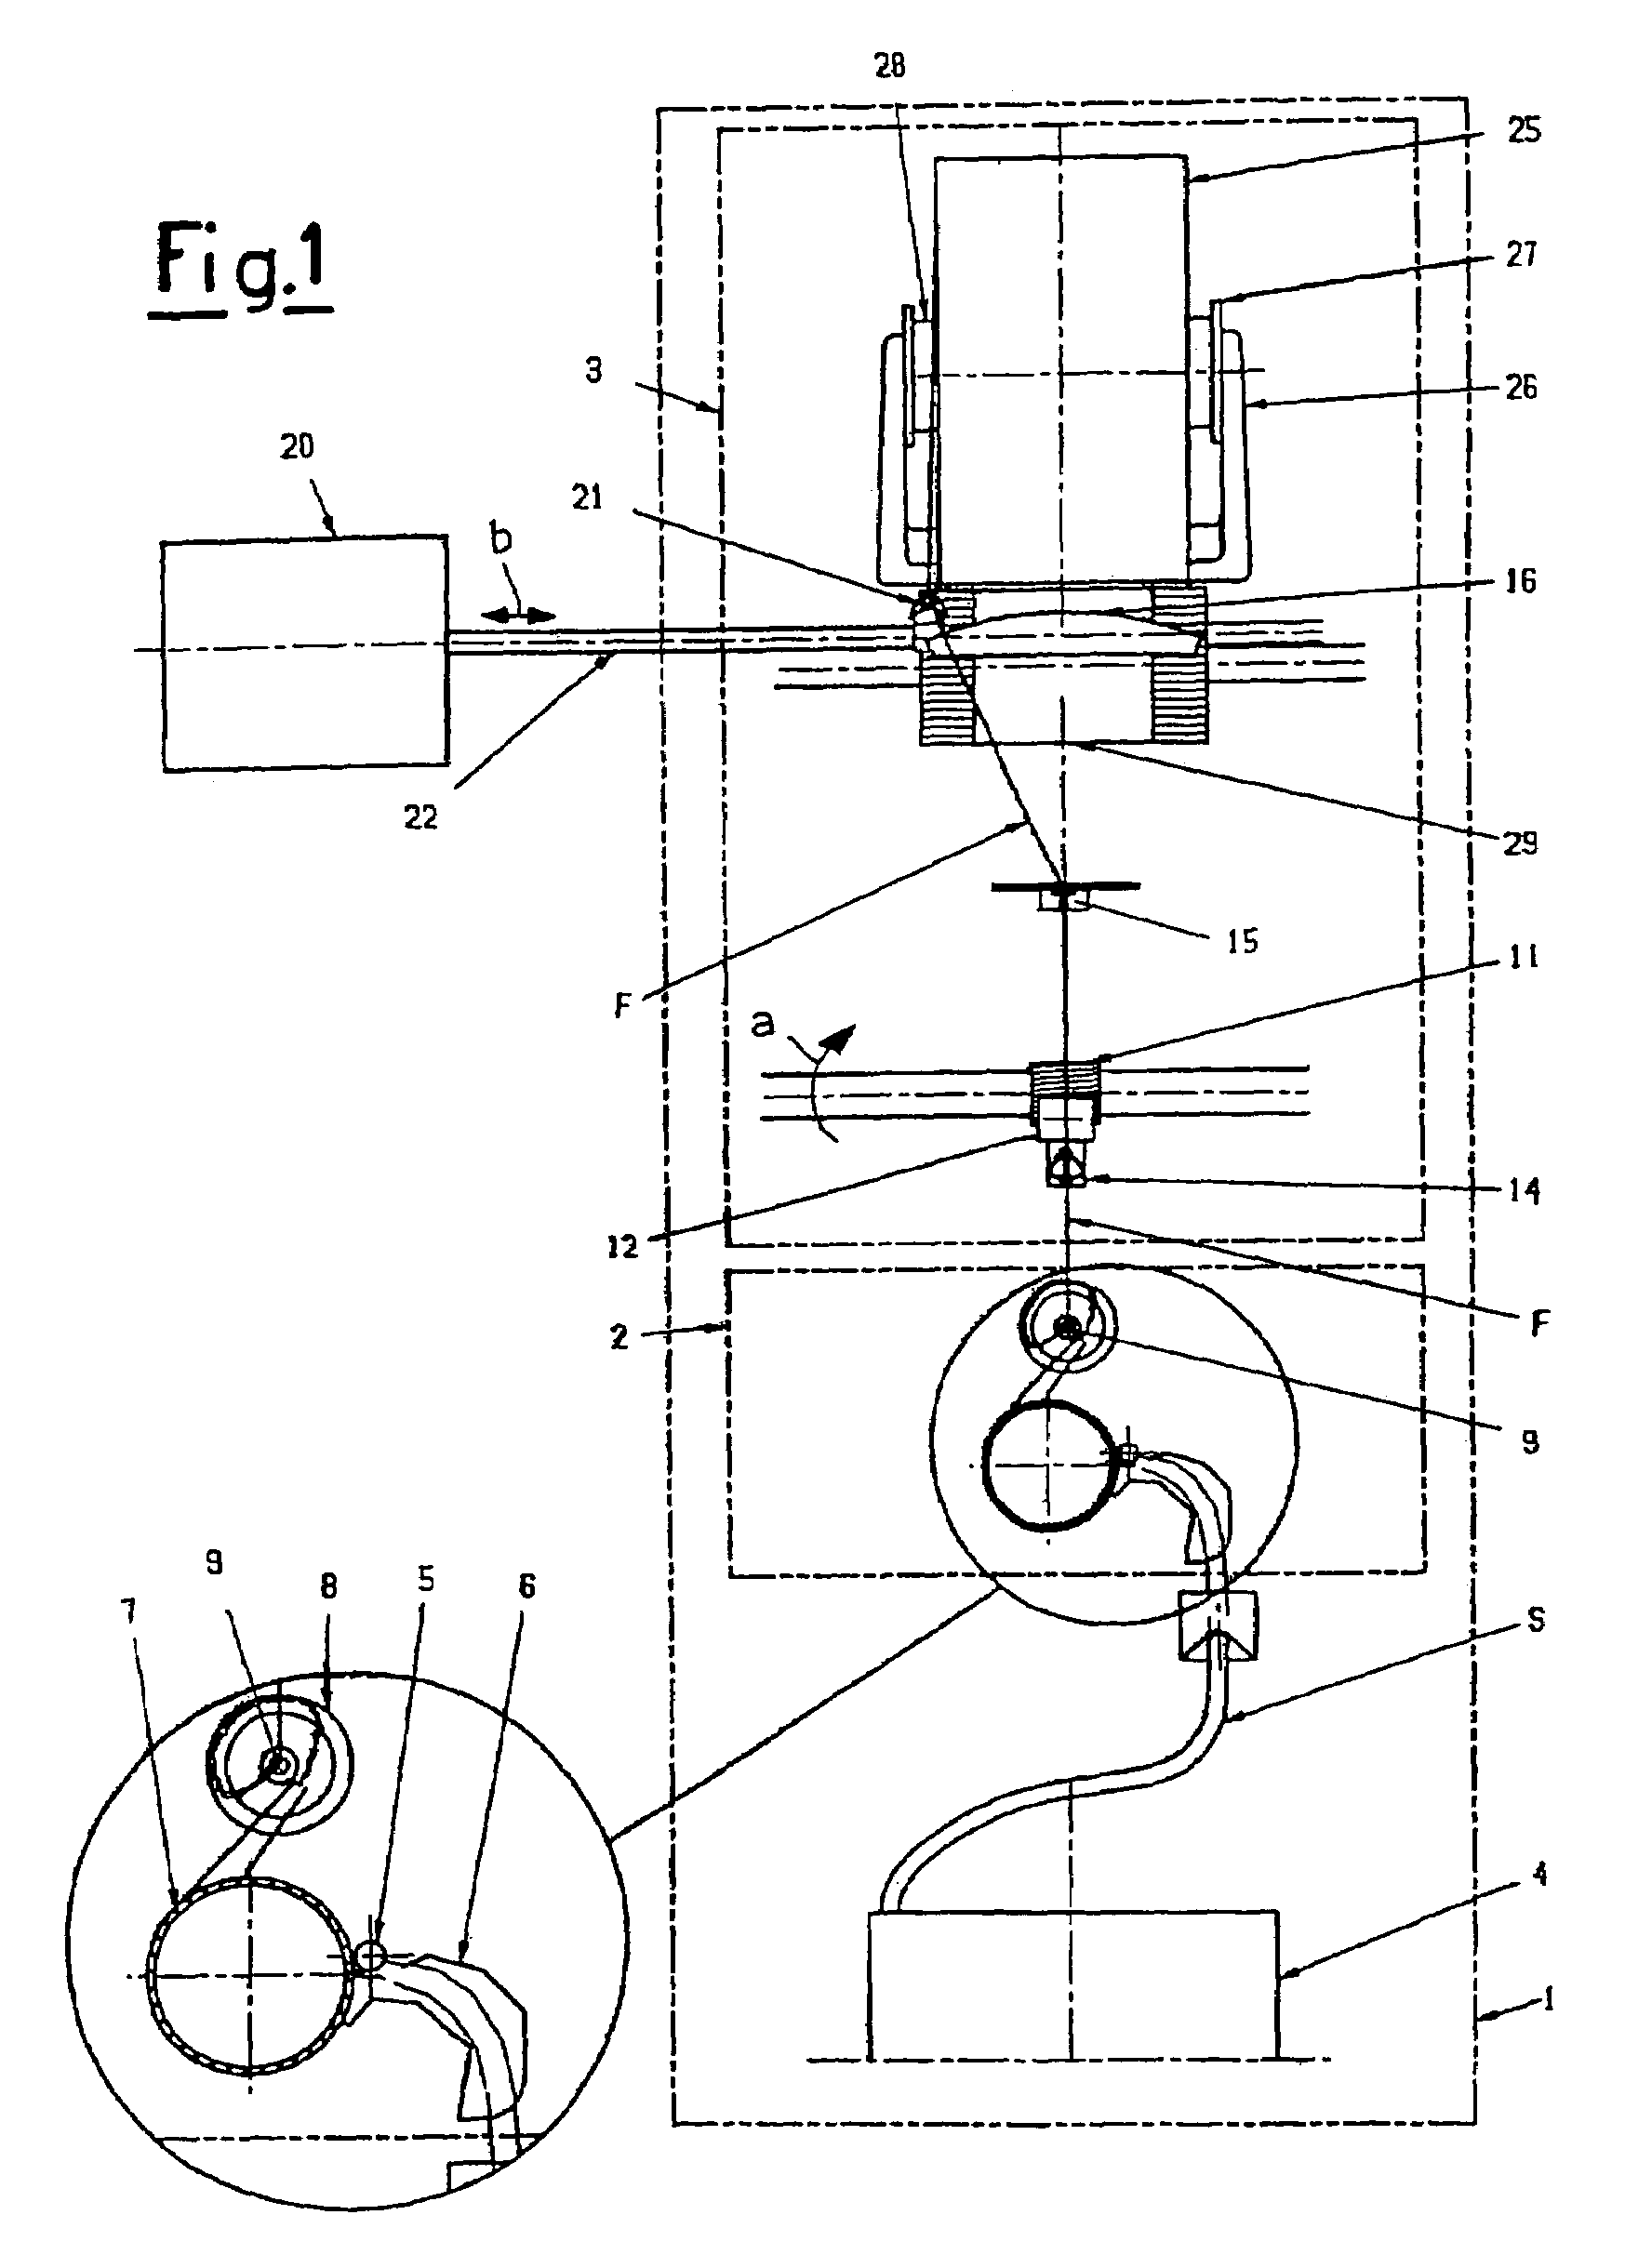 Service trolley for open-end spinning machines